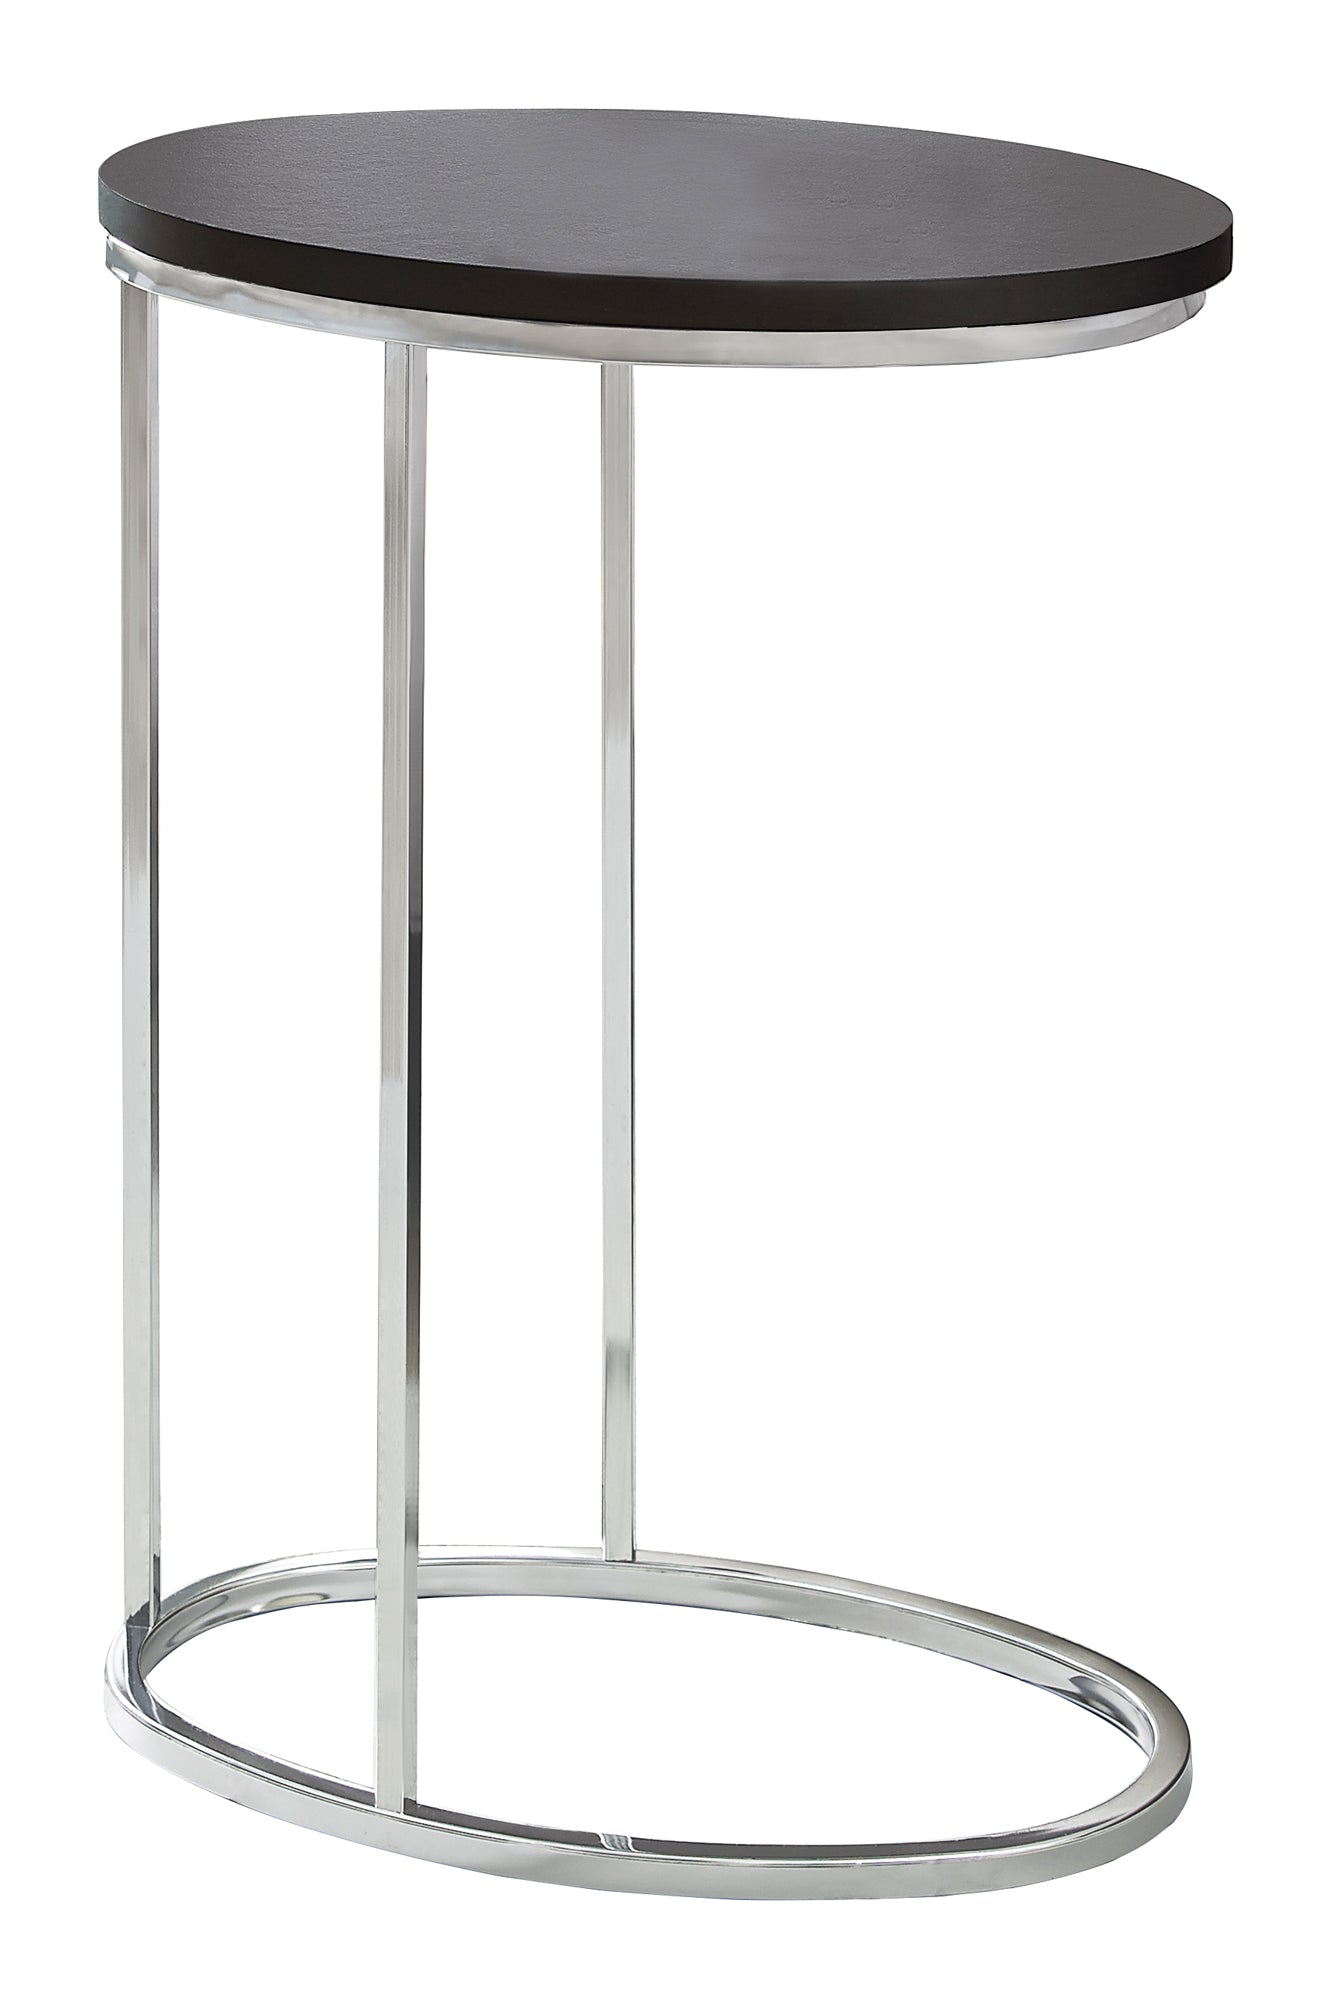 Accent Table - Oval / Espresso With Chrome Metal